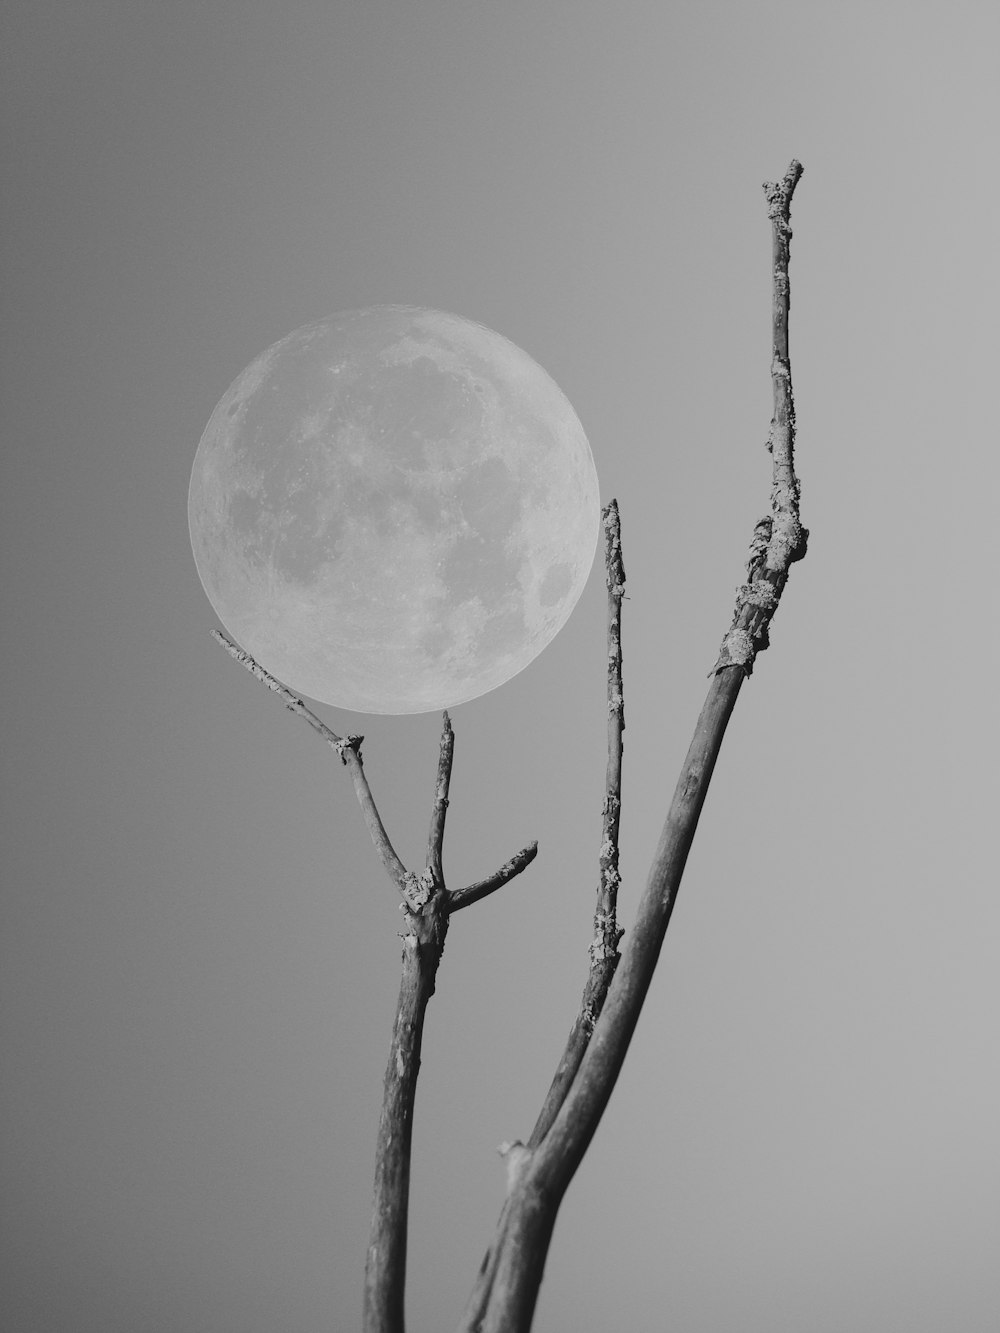 a tree branch with a full moon in the background